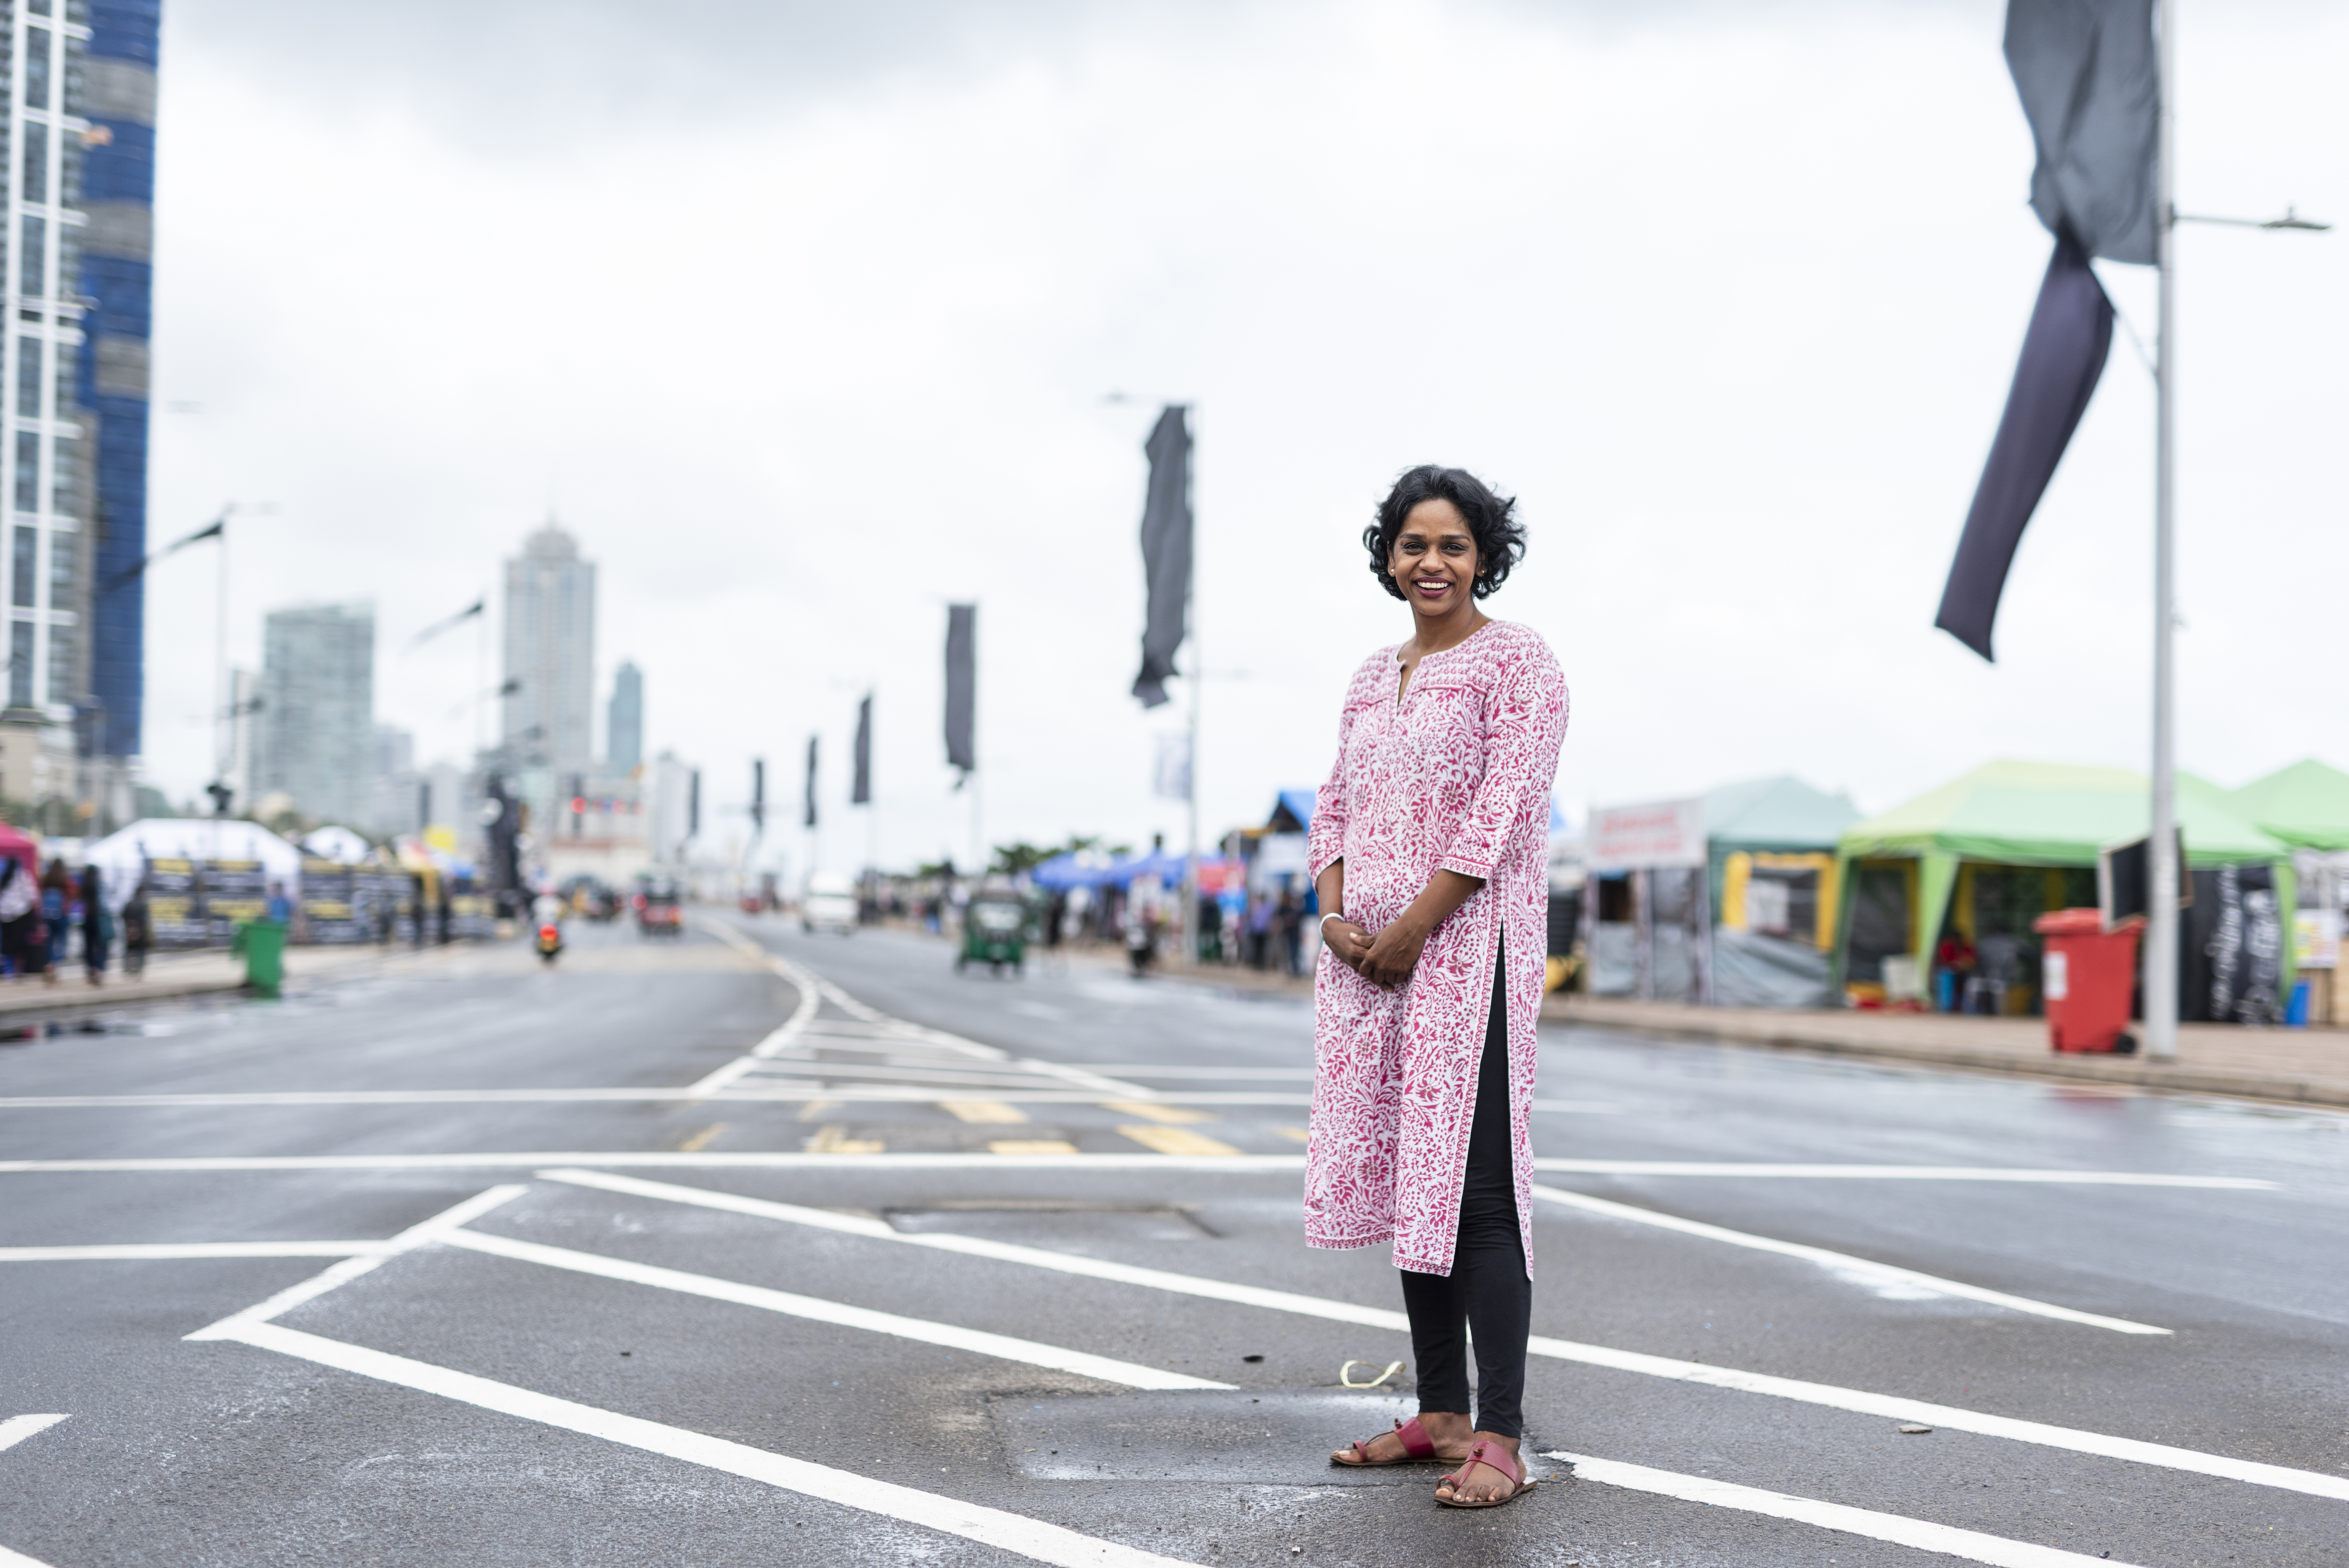 Bhavani Fonseka, Senior Researcher at the Centre for Policy Alternatives, and a prominent constitutional and human rights lawyer in Sri Lanka. (Image credit: Sanjaya Mendis)